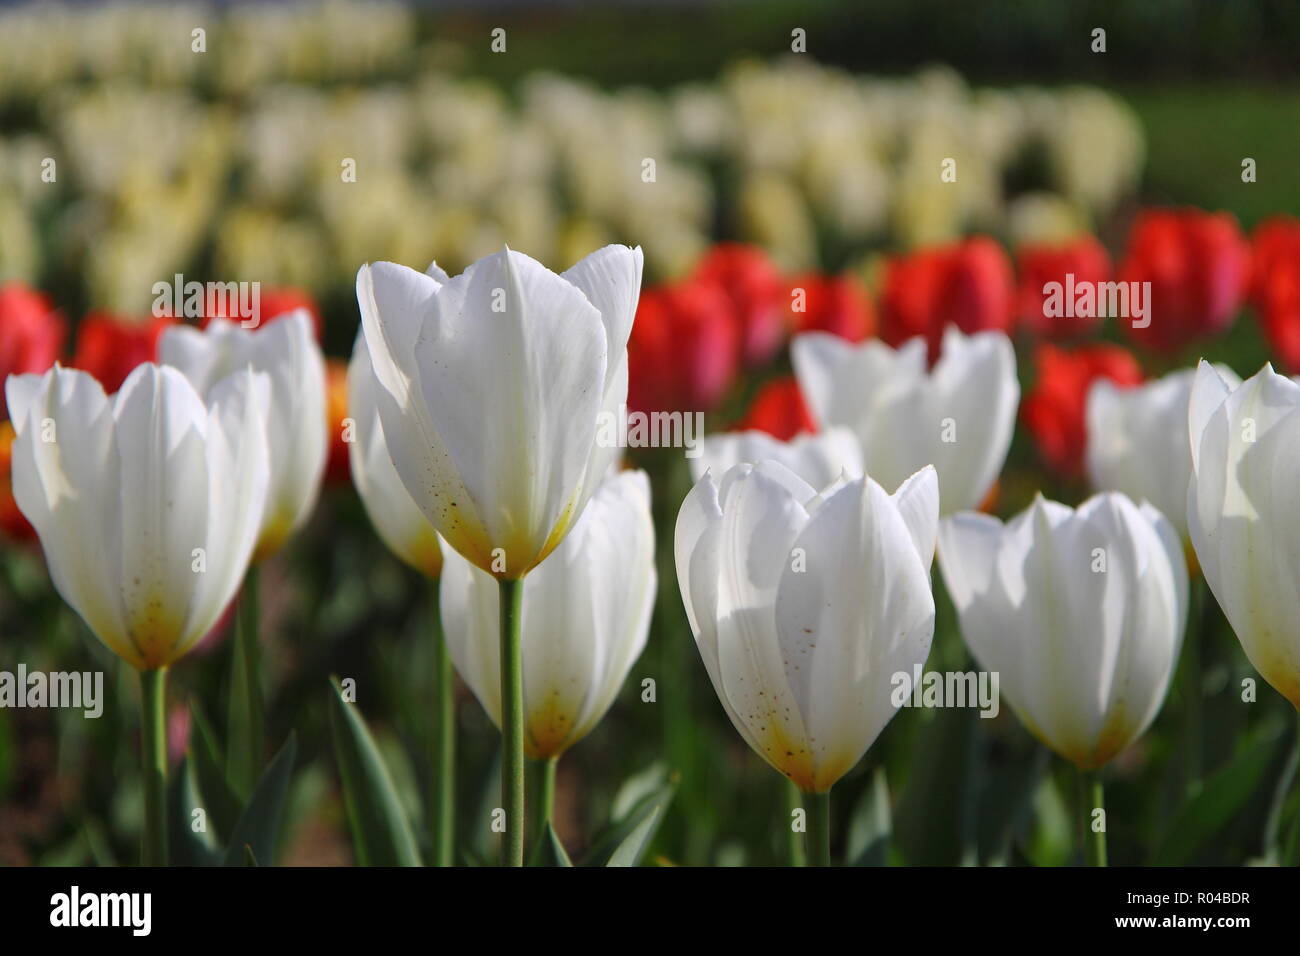 Beautiful white tulips in closeup at tulip festival (red and yellow in background) - SRINAGAR, INDIA (April 2017) Stock Photo